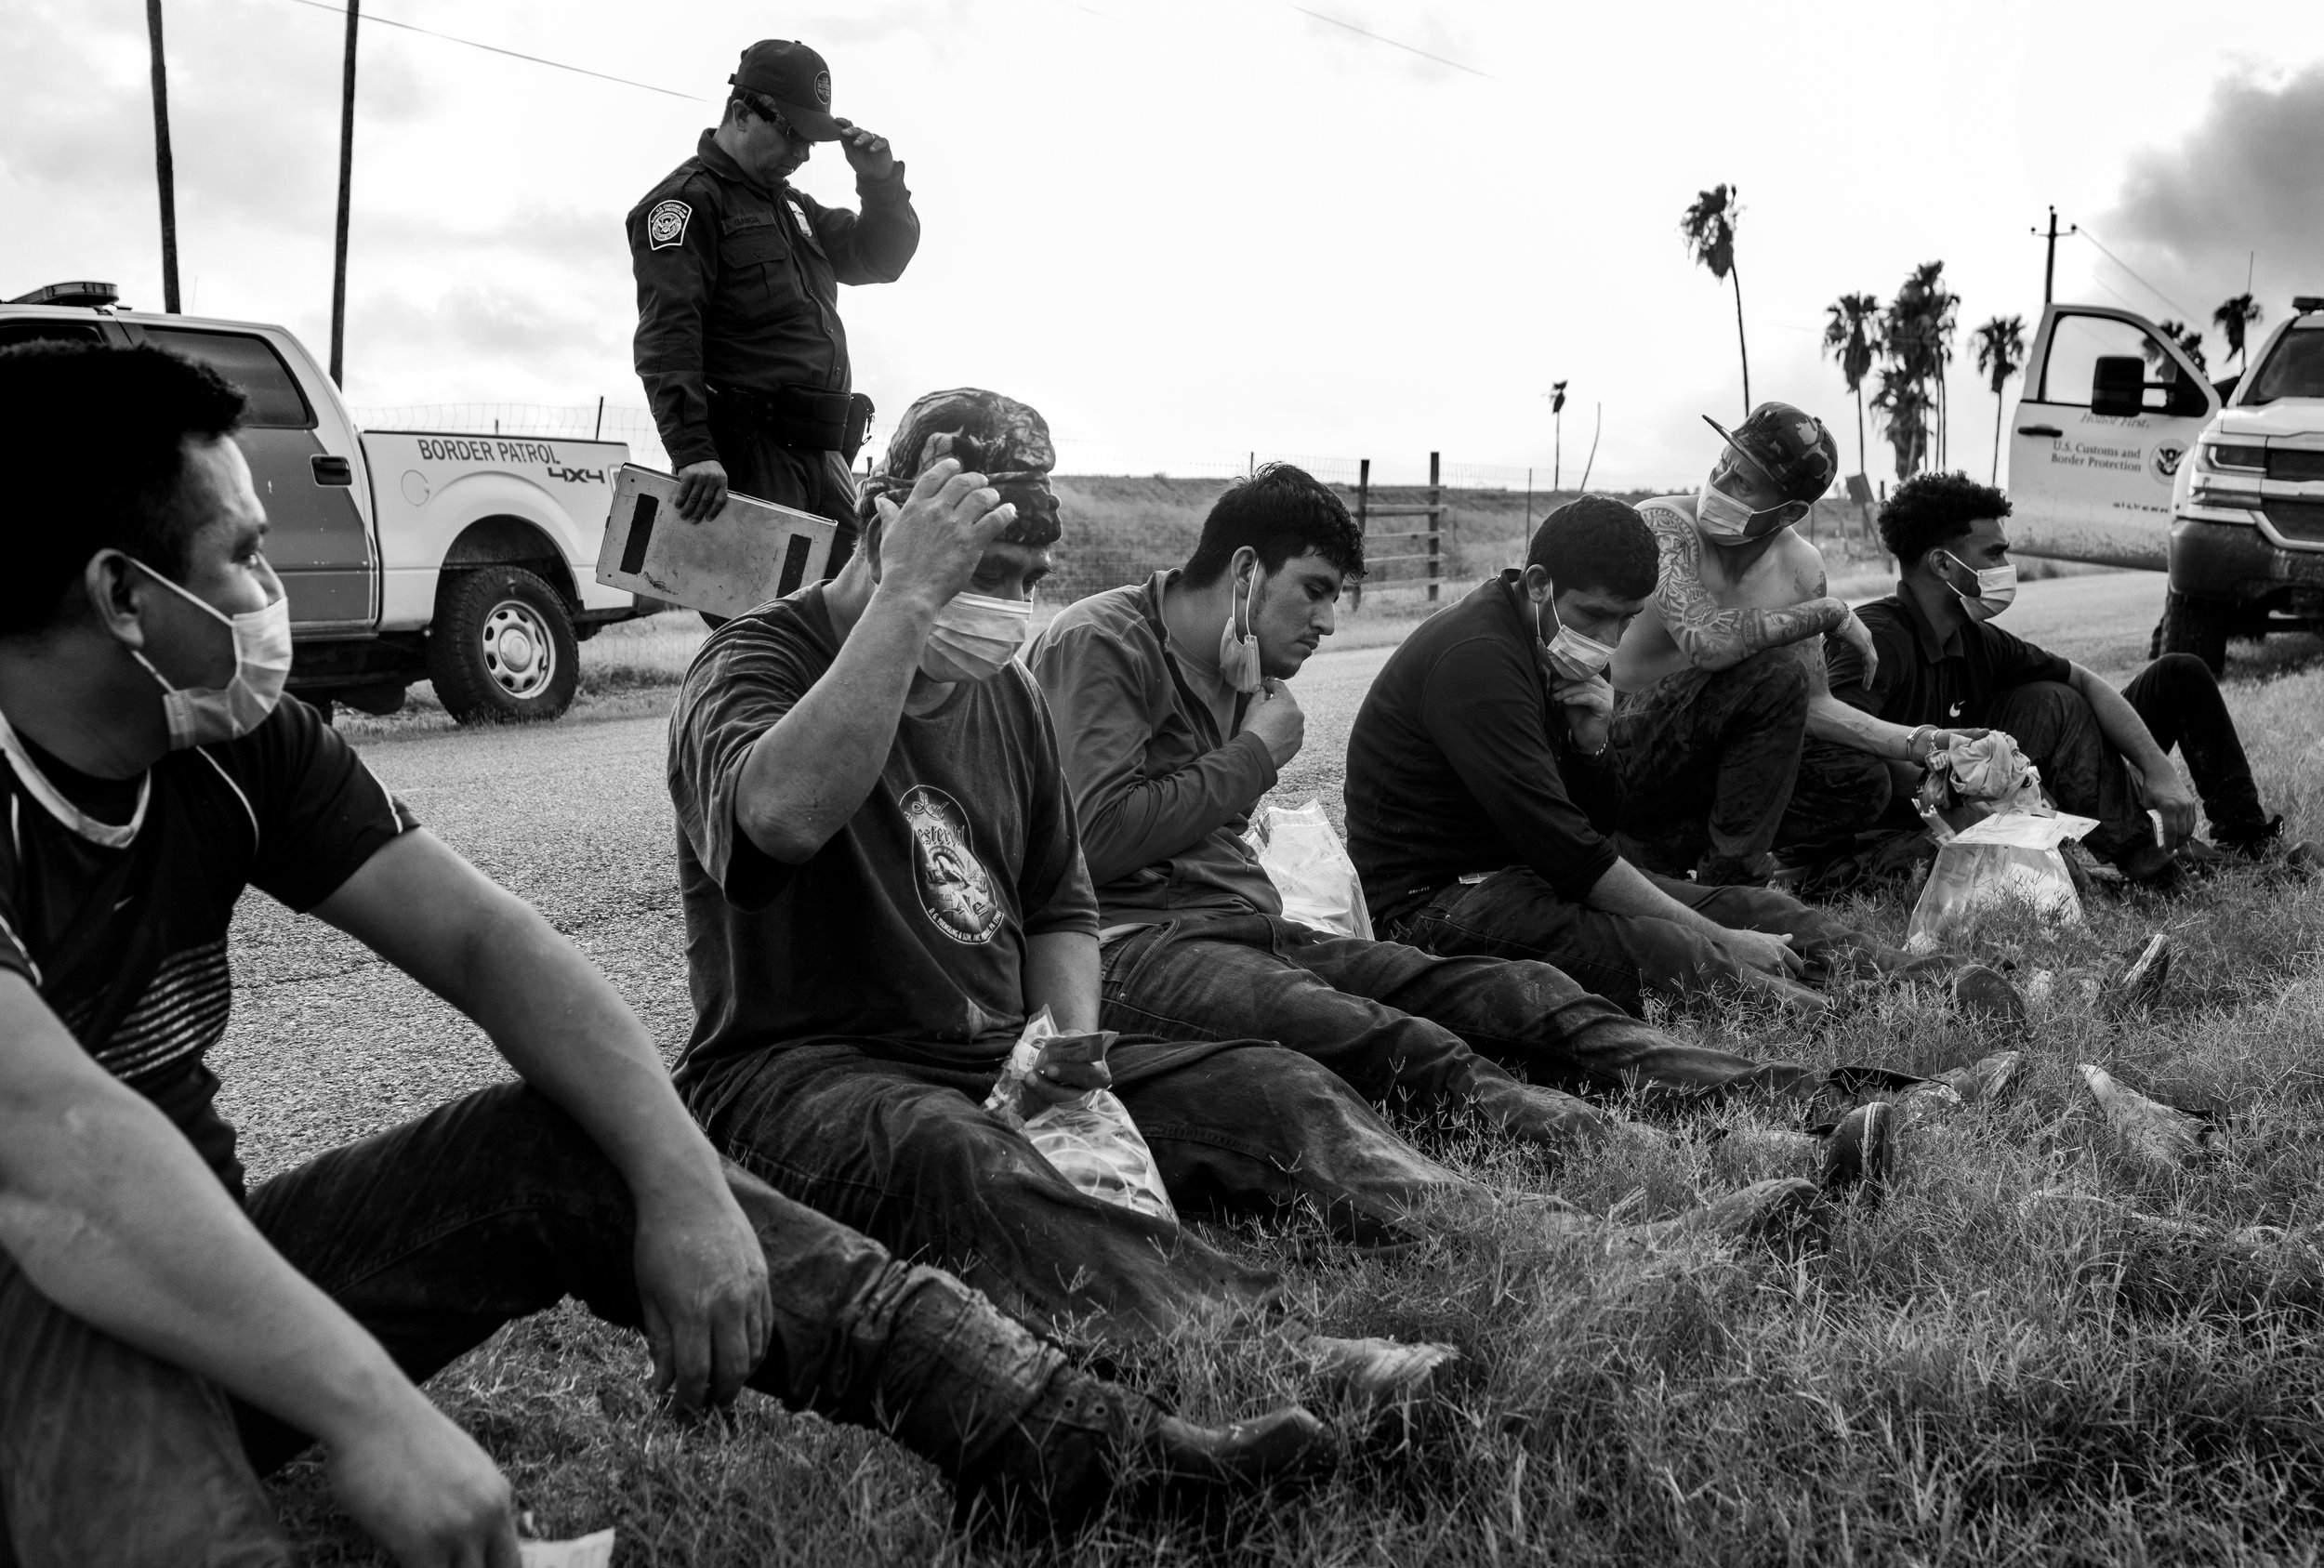  Migrant “runners” wait handcuffed after trying to evade Border Patrol in La Joya, Texas. 